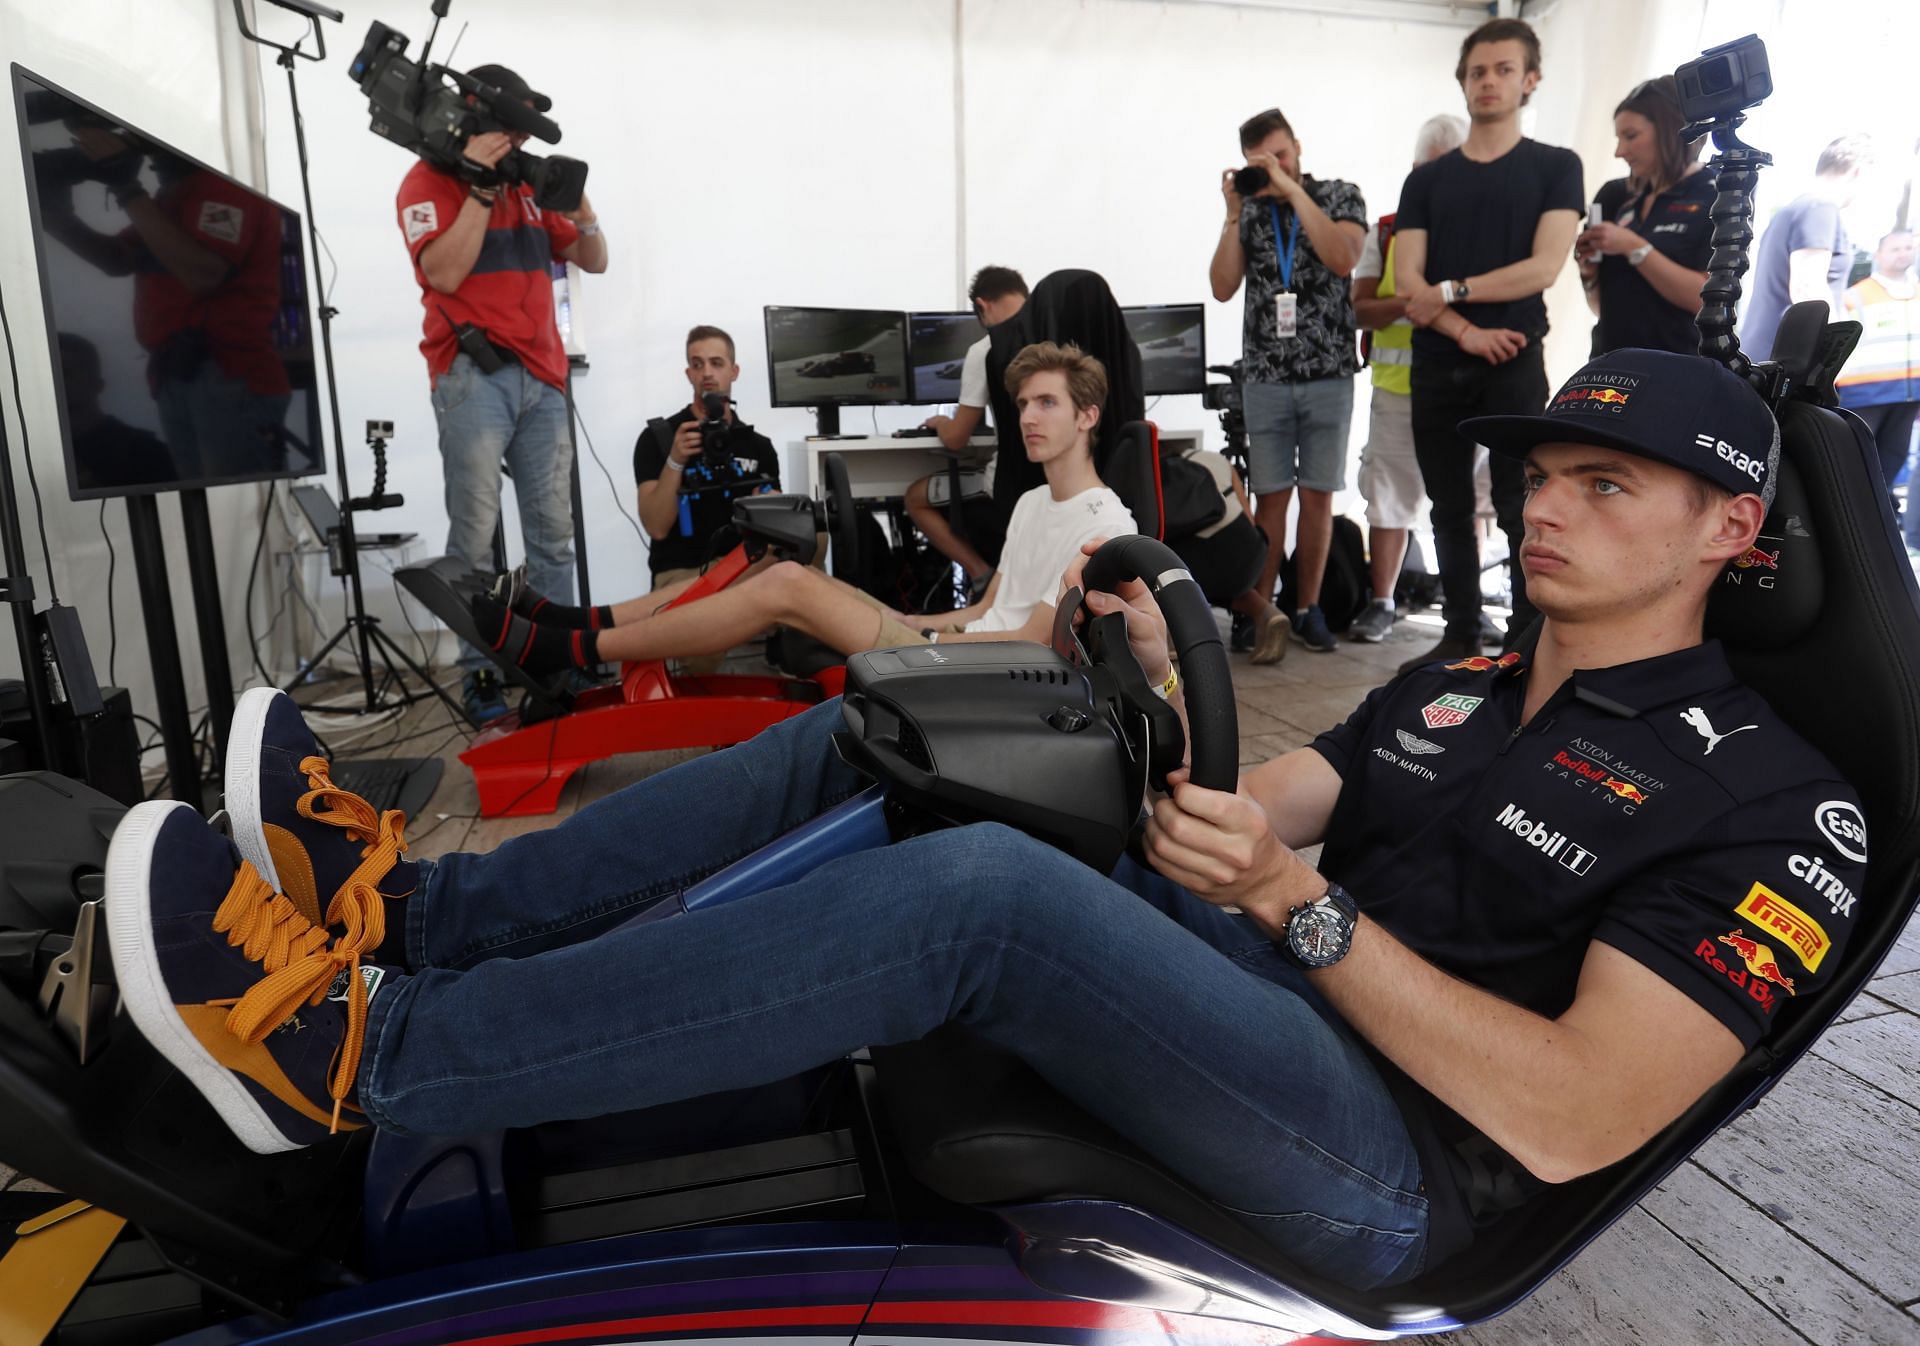 Max has been an avid sim racer ever since starting his racing career (Photo by Laszlo Balogh/Getty Images)